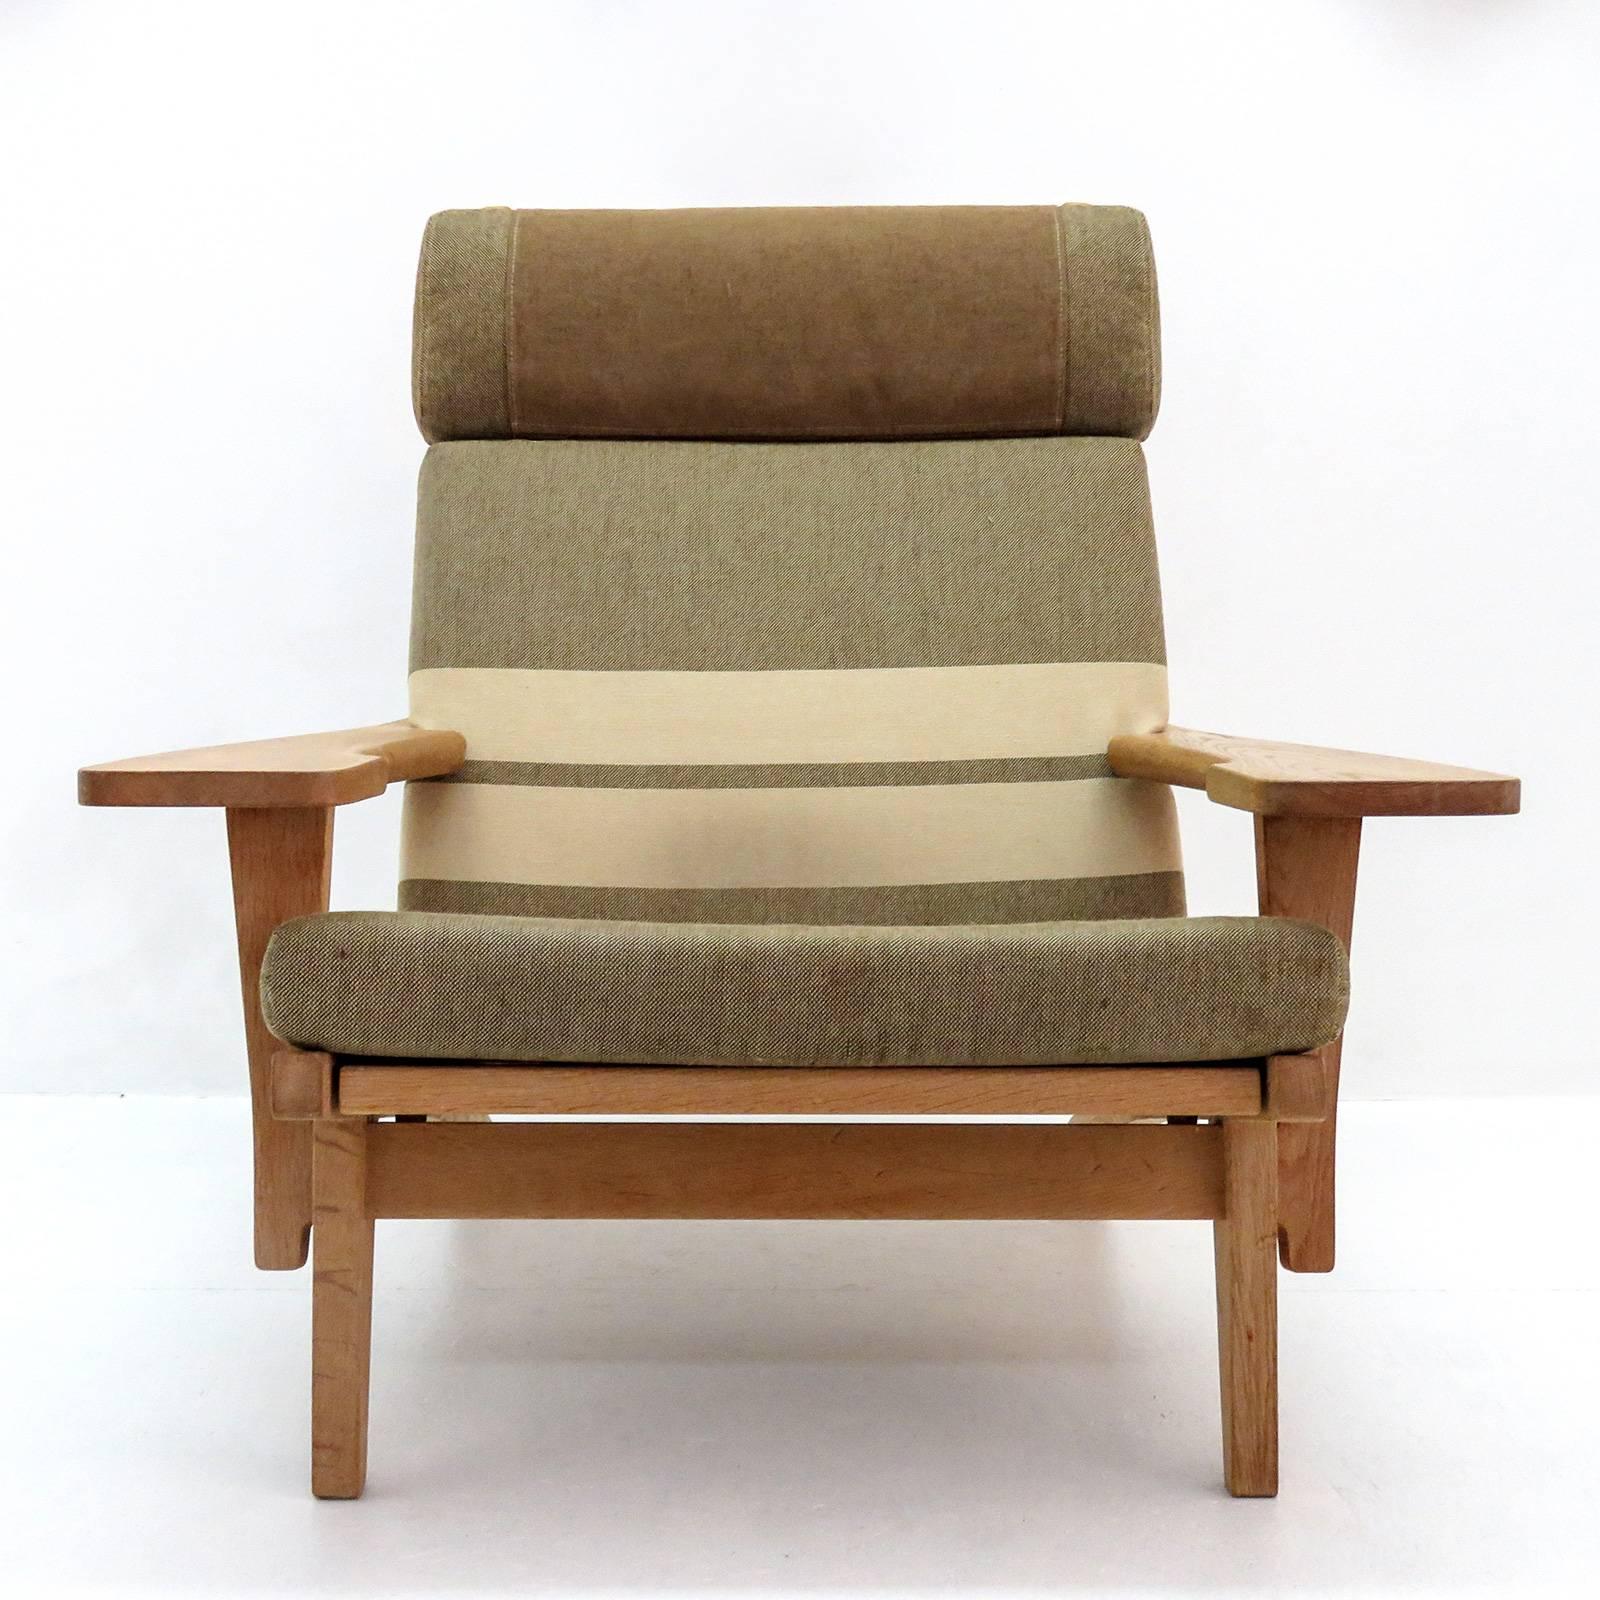 Large-scale high back armchairs by Hans Wegner with solid oak frame and original cushions in greenish striped wool, produced by GETAMA in 1969, model GE 375, detachable neck cushion, original makers mark to underside.